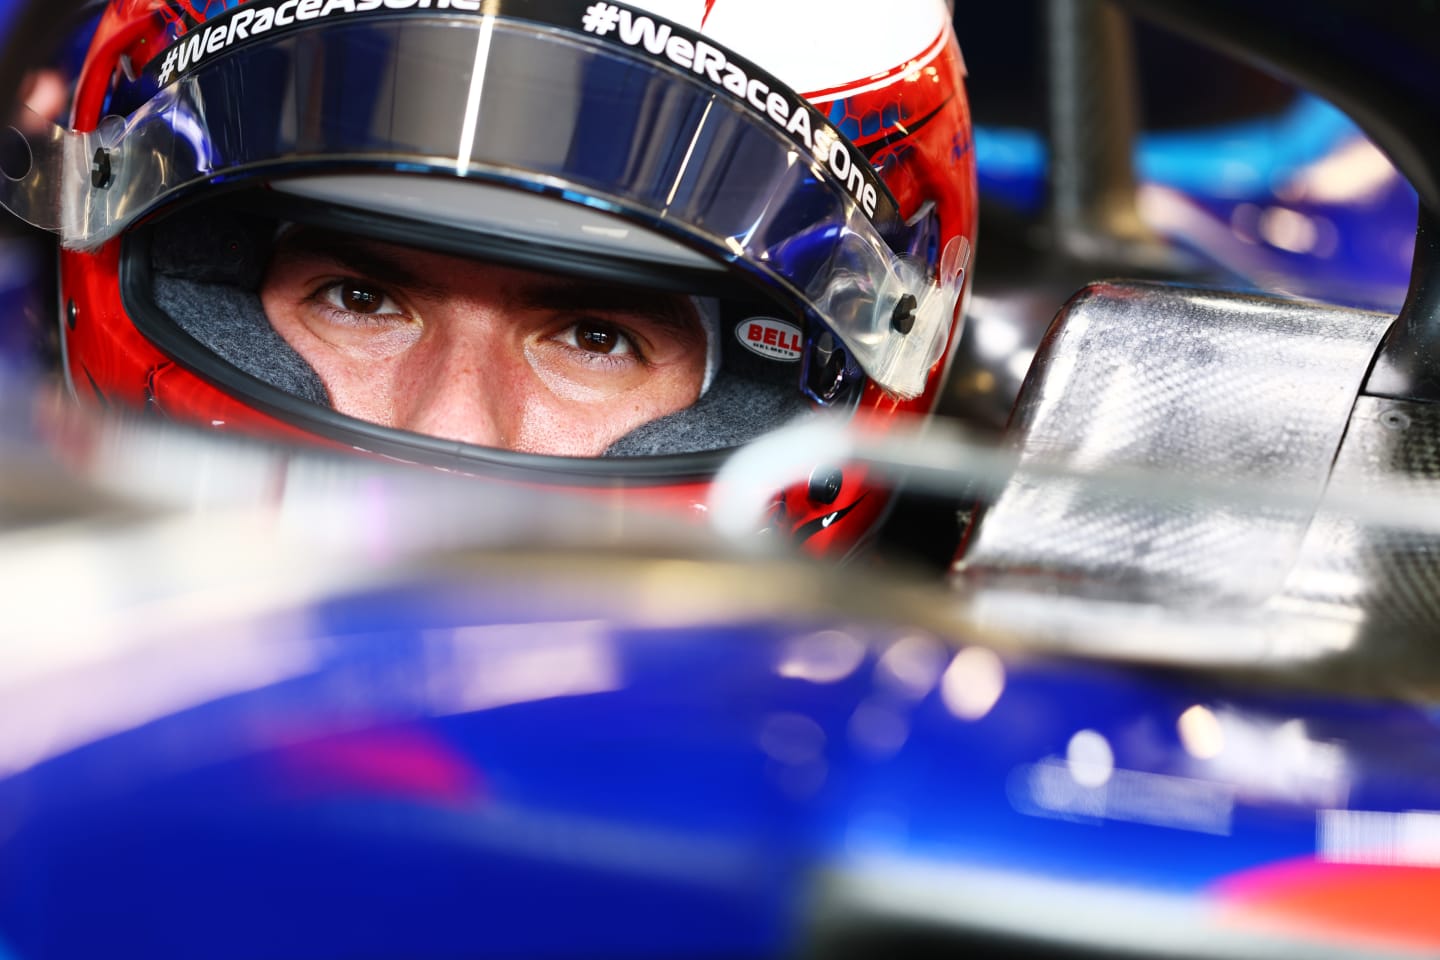 BUDAPEST, HUNGARY - JULY 29: Nicholas Latifi of Canada and Williams prepares to drive in the garage during practice ahead of the F1 Grand Prix of Hungary at Hungaroring on July 29, 2022 in Budapest, Hungary. (Photo by Mark Thompson/Getty Images)